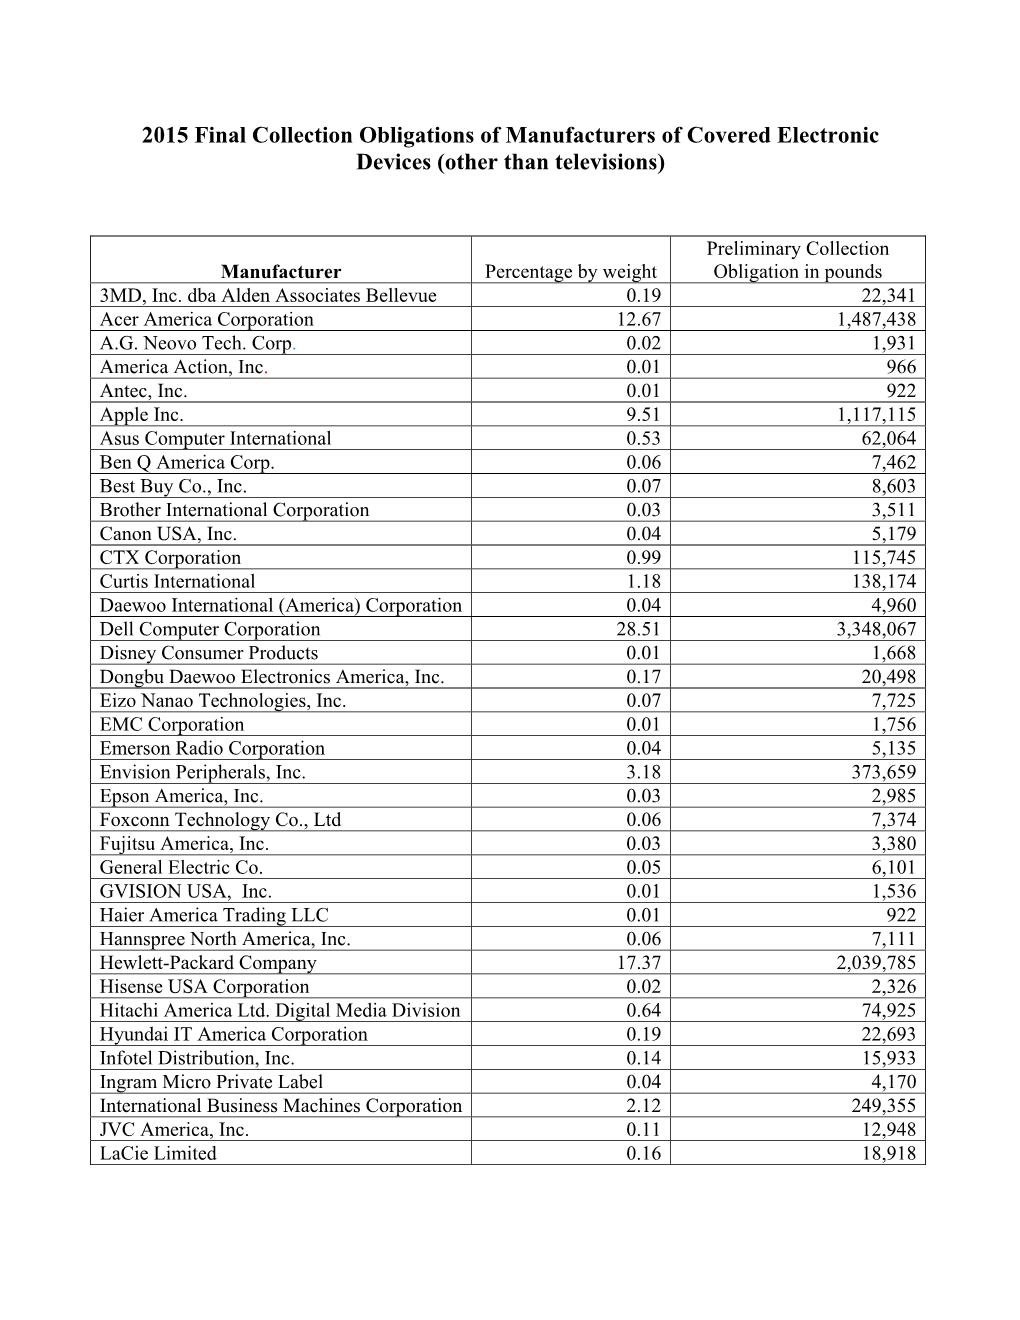 2015 Final Collection Obligations of Manufacturers of Covered Electronic Devices (Other Than Televisions)